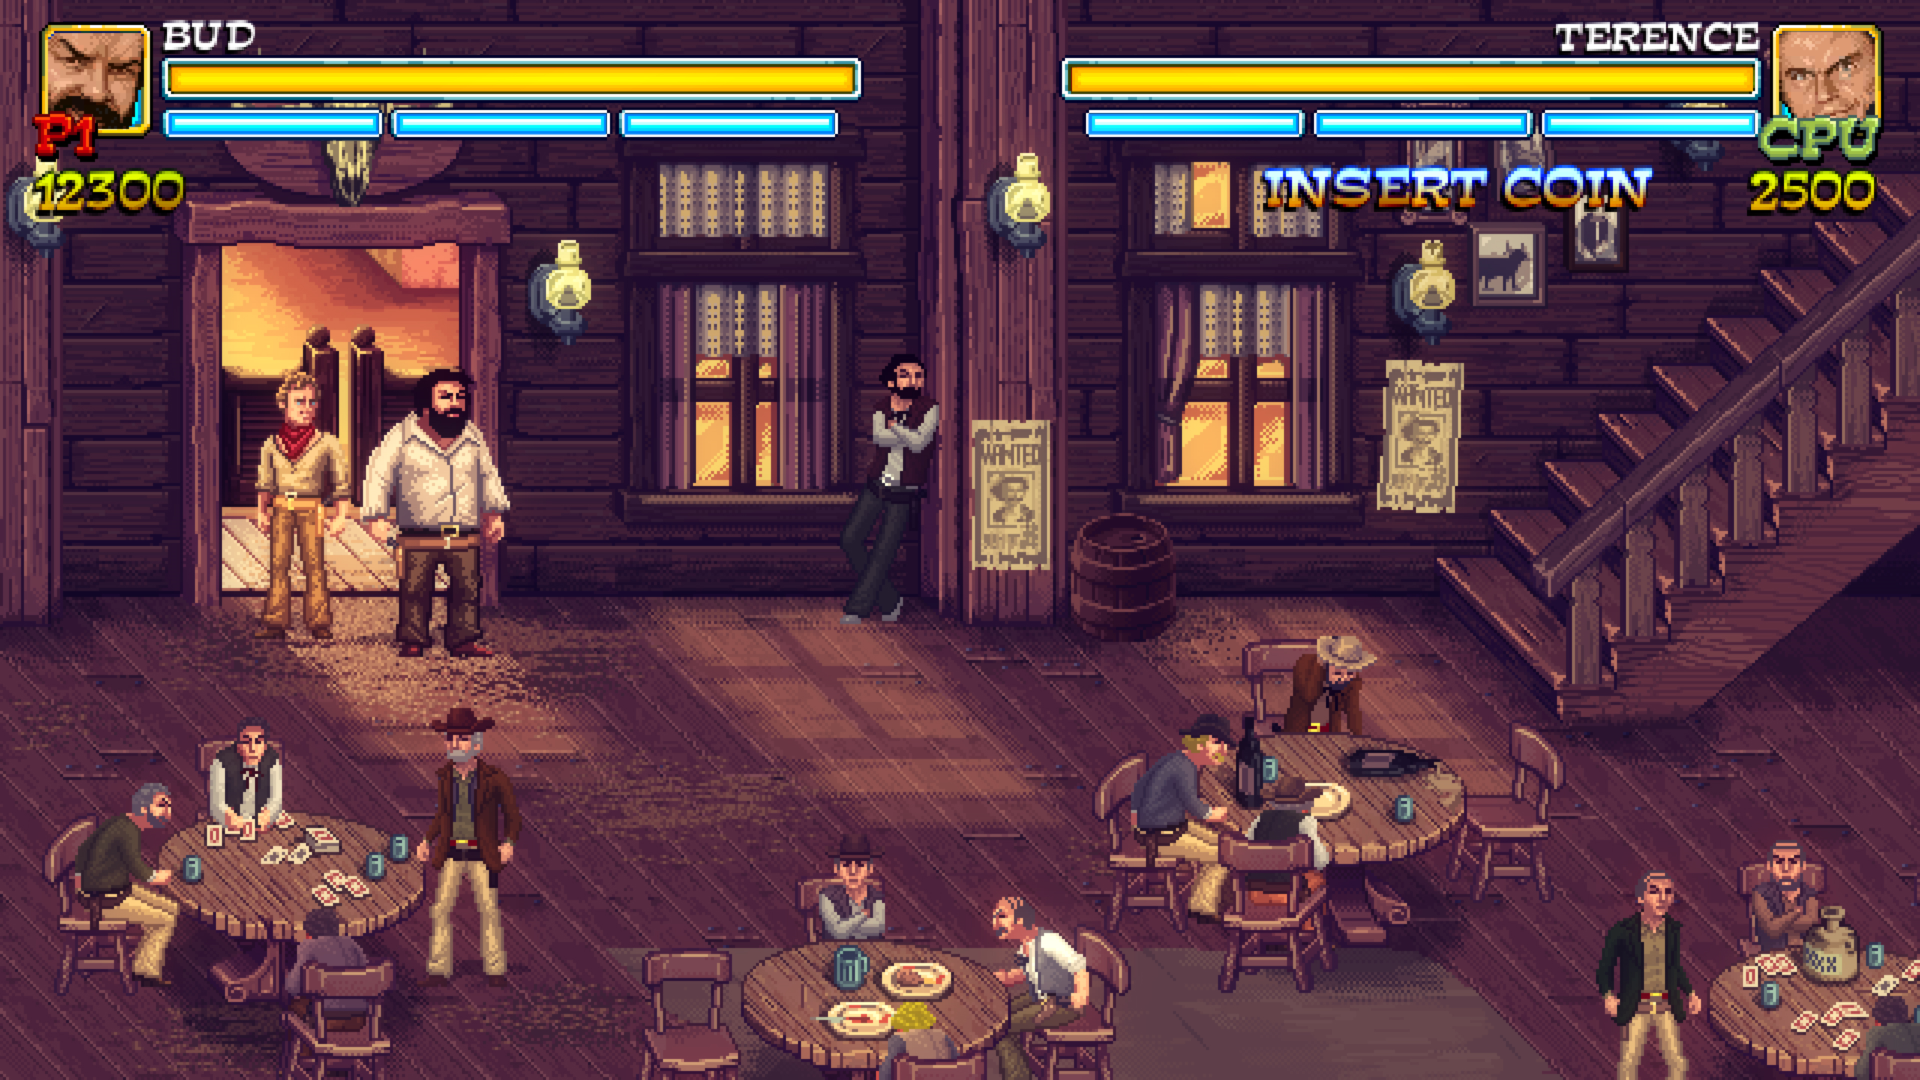 Bud Spencer & Terence Hill And Beans:Amazon.com:Appstore for Android